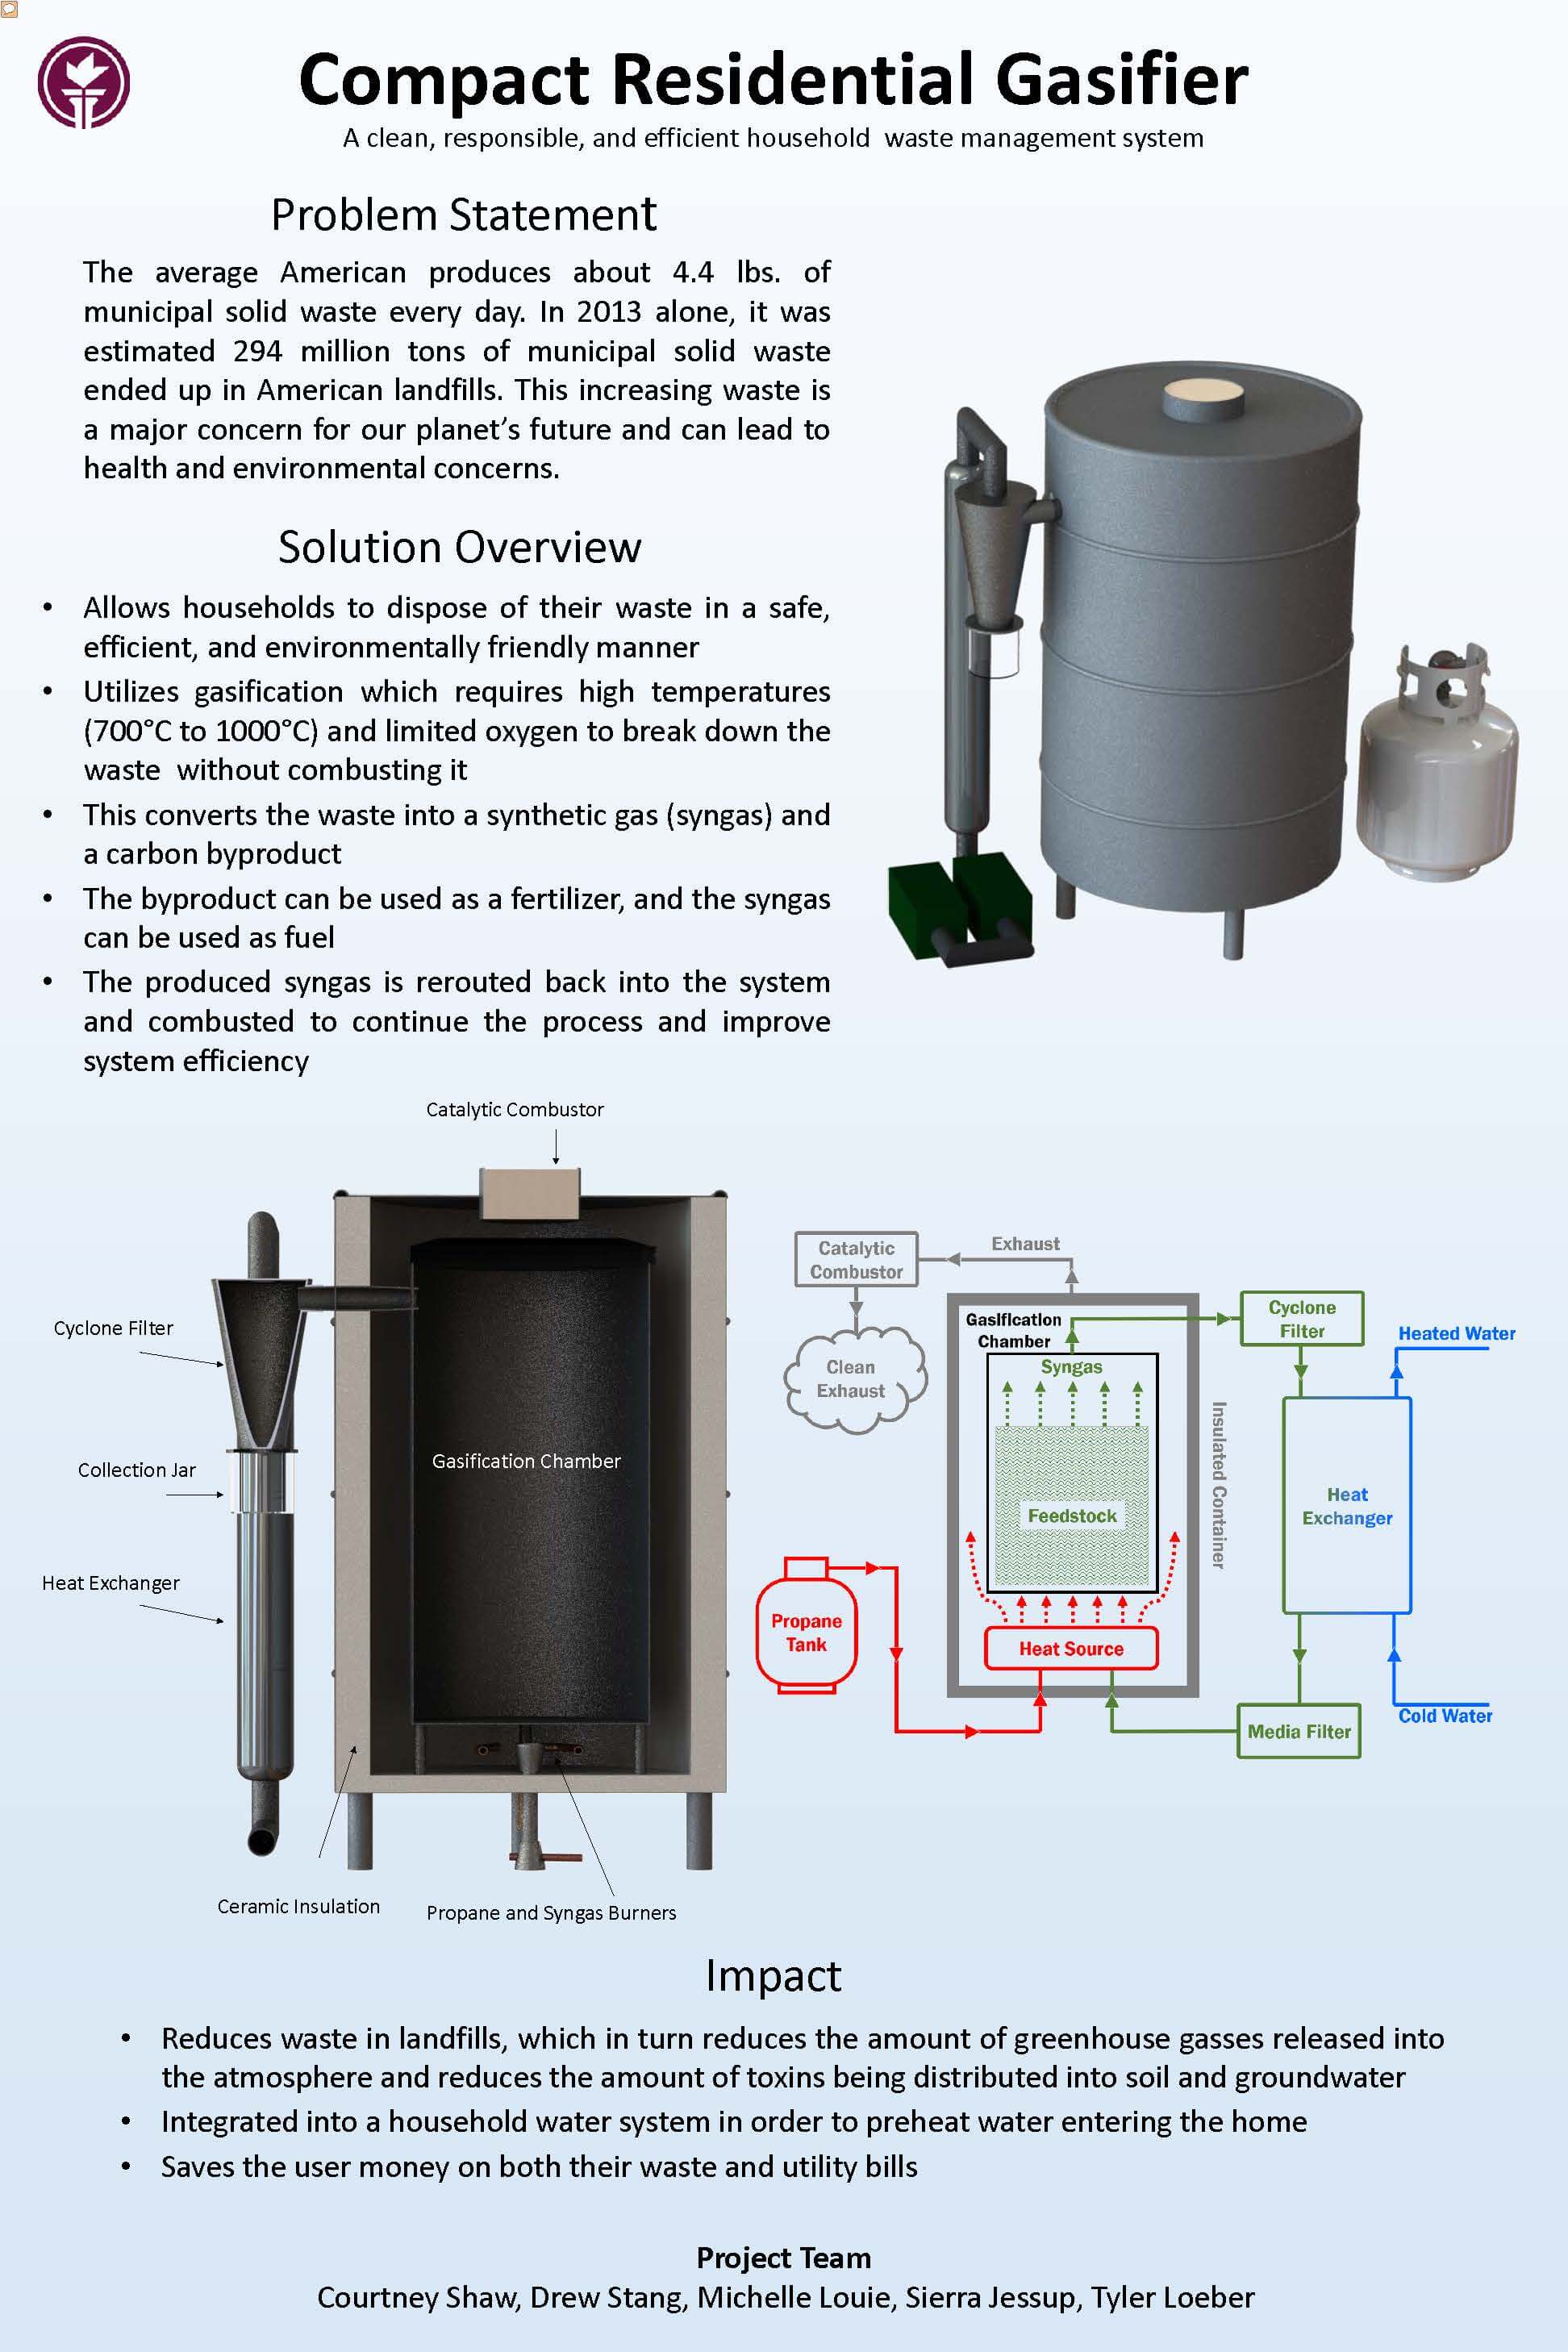 Compact Residential Gasifier Poster